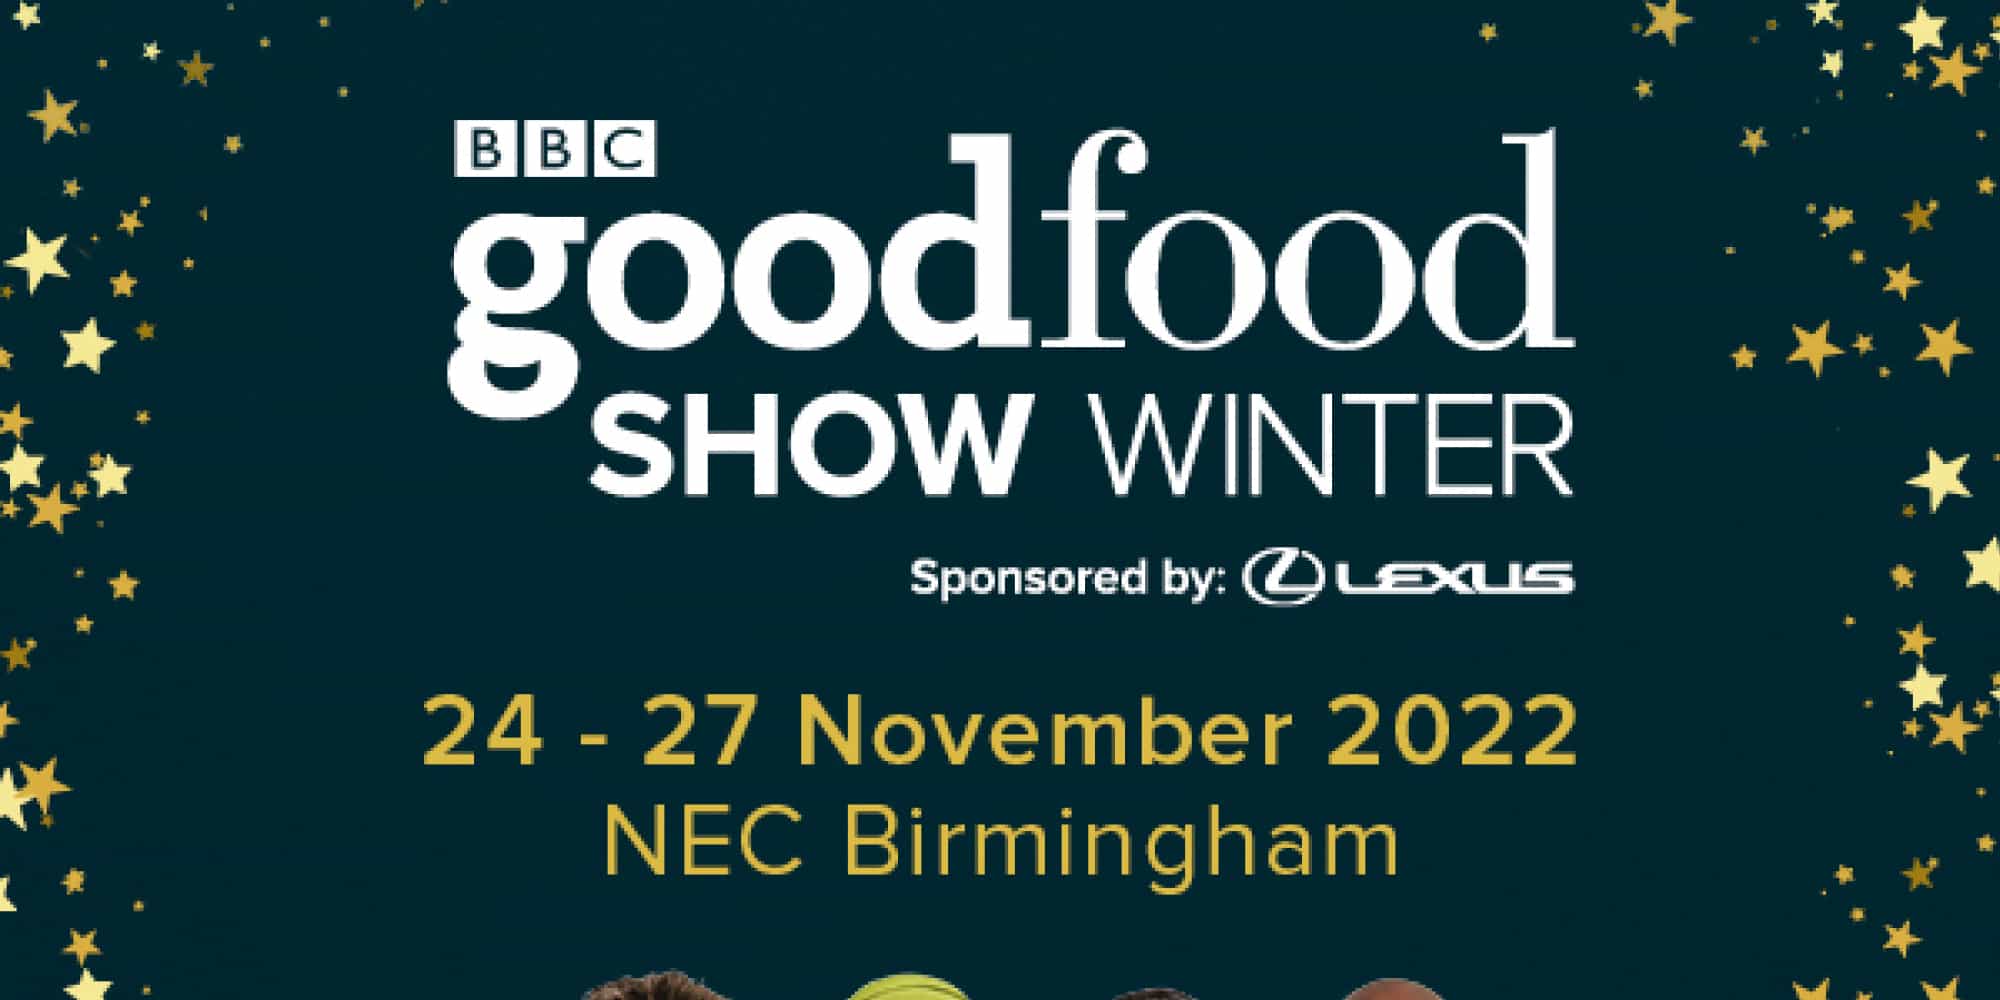 Win Tickets For The BBC Good Food Show Winter 2022 Pioneer Magazines